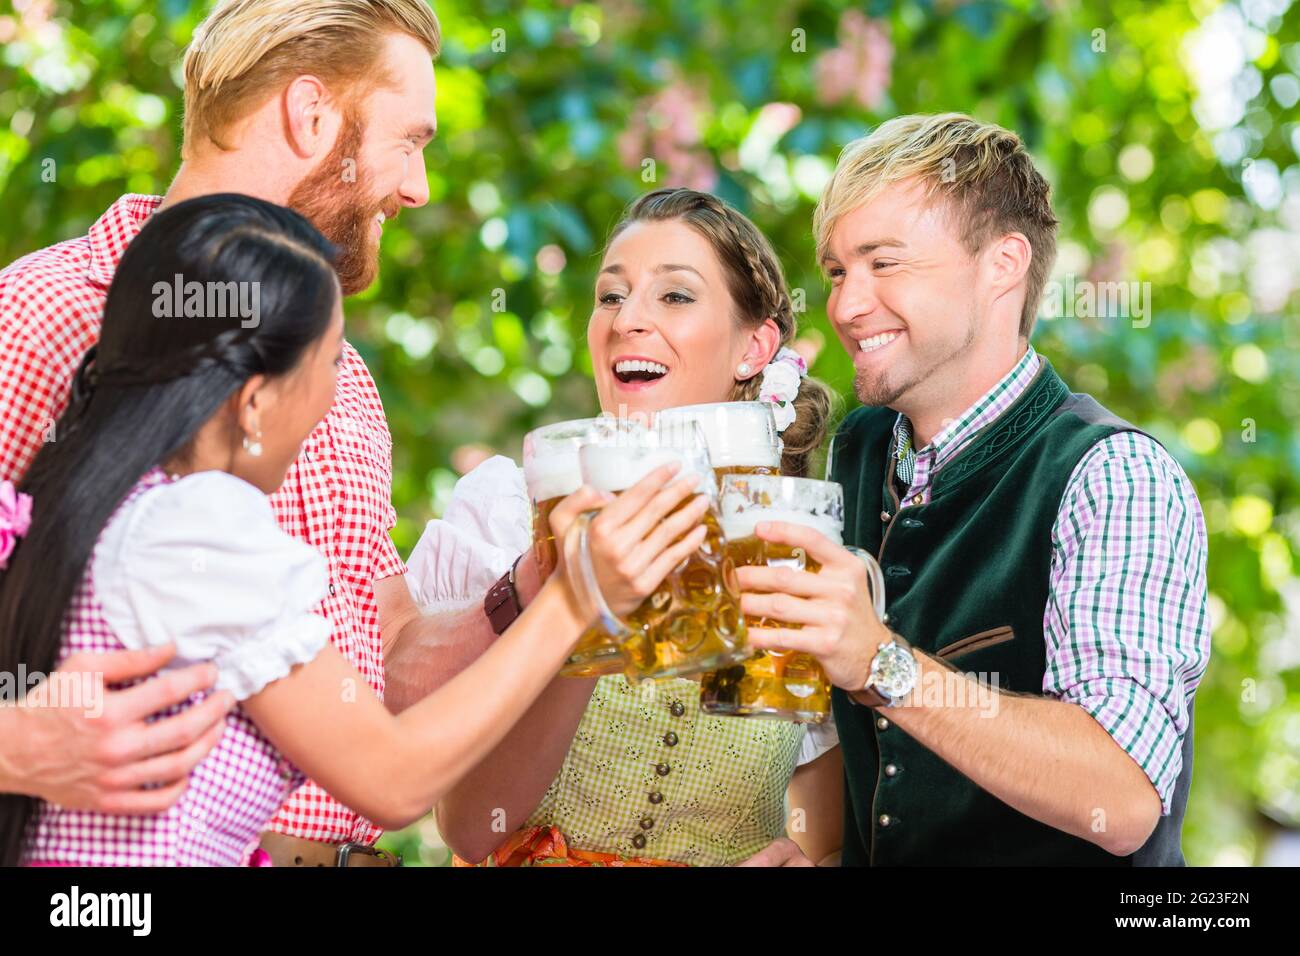 Friends, two men, two women, standing in beer garden clinking glasses with beer Stock Photo